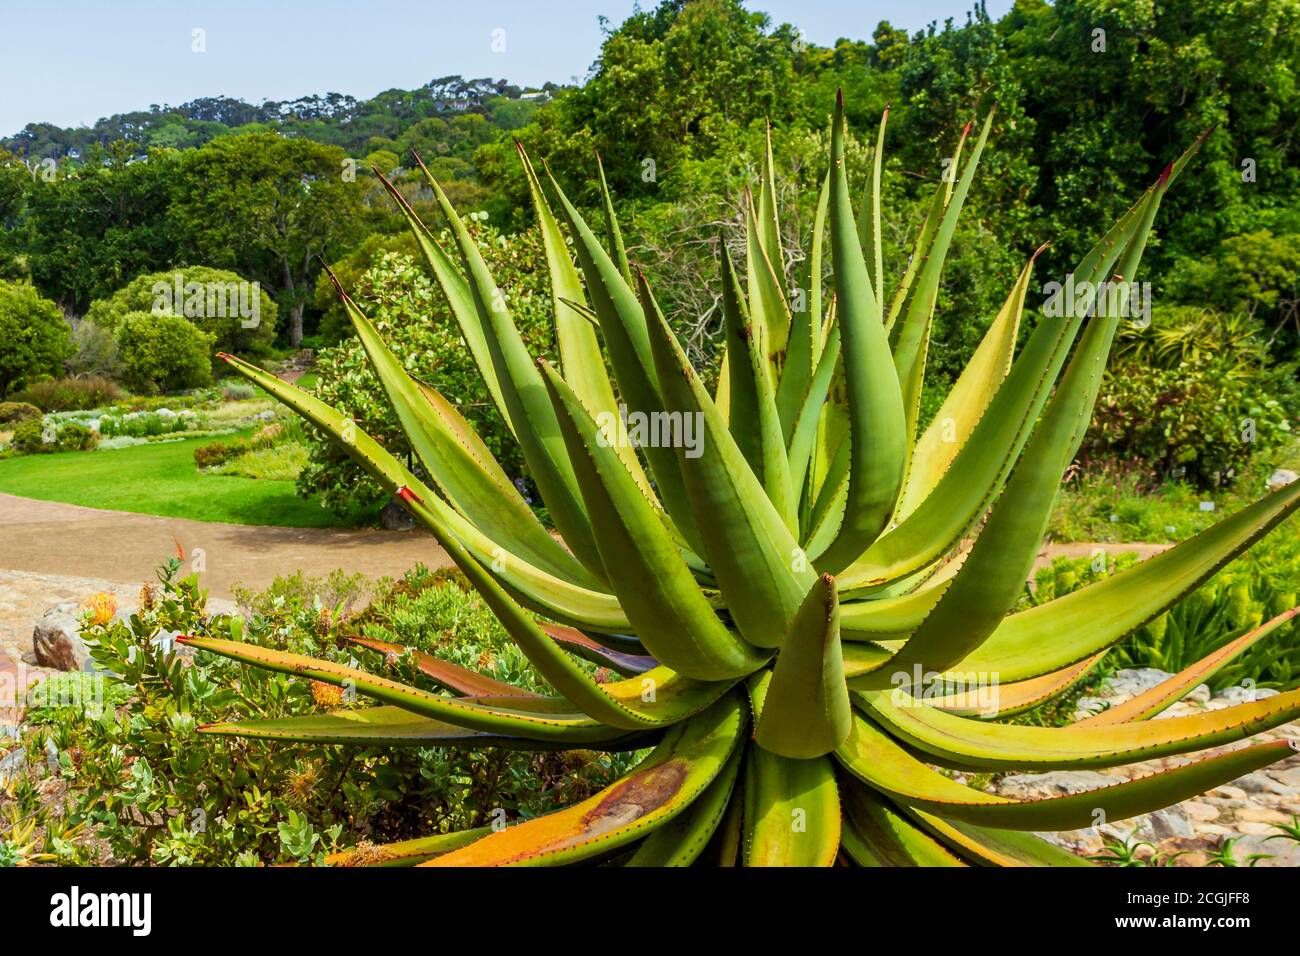 Big Aloe Vera cactus plant in Cape Town, South Africa Stock Photo - Alamy